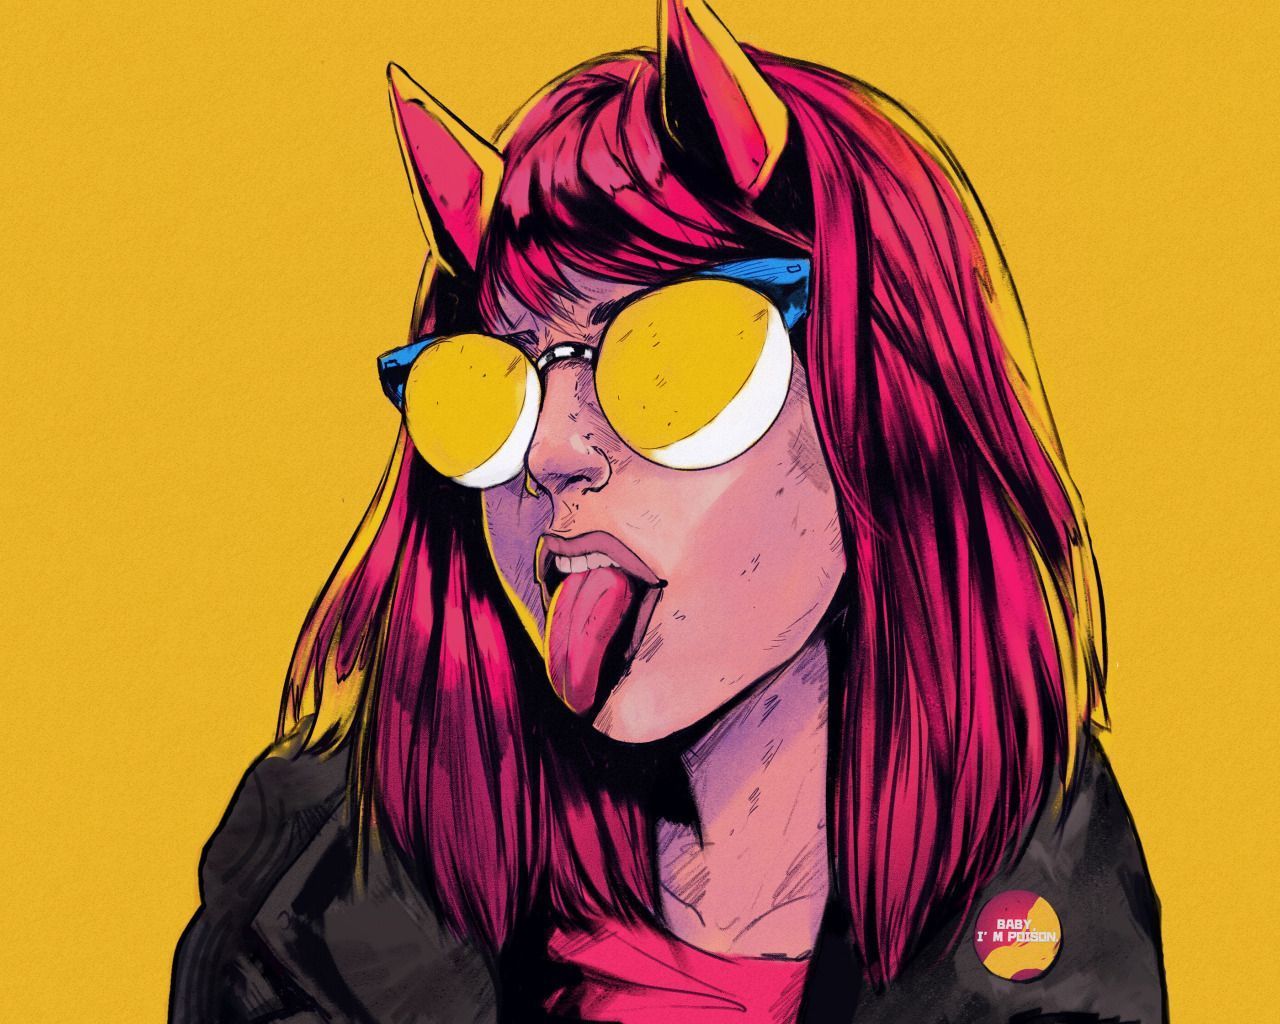 Download wallpaper Girl, Language, Glasses, Style, Face, Girl, Horns, Art, Art, Style, Face, Glasses, Horns, Tongue, Aesthetic, Bruno Ferreira, section art in resolution 1280x1024